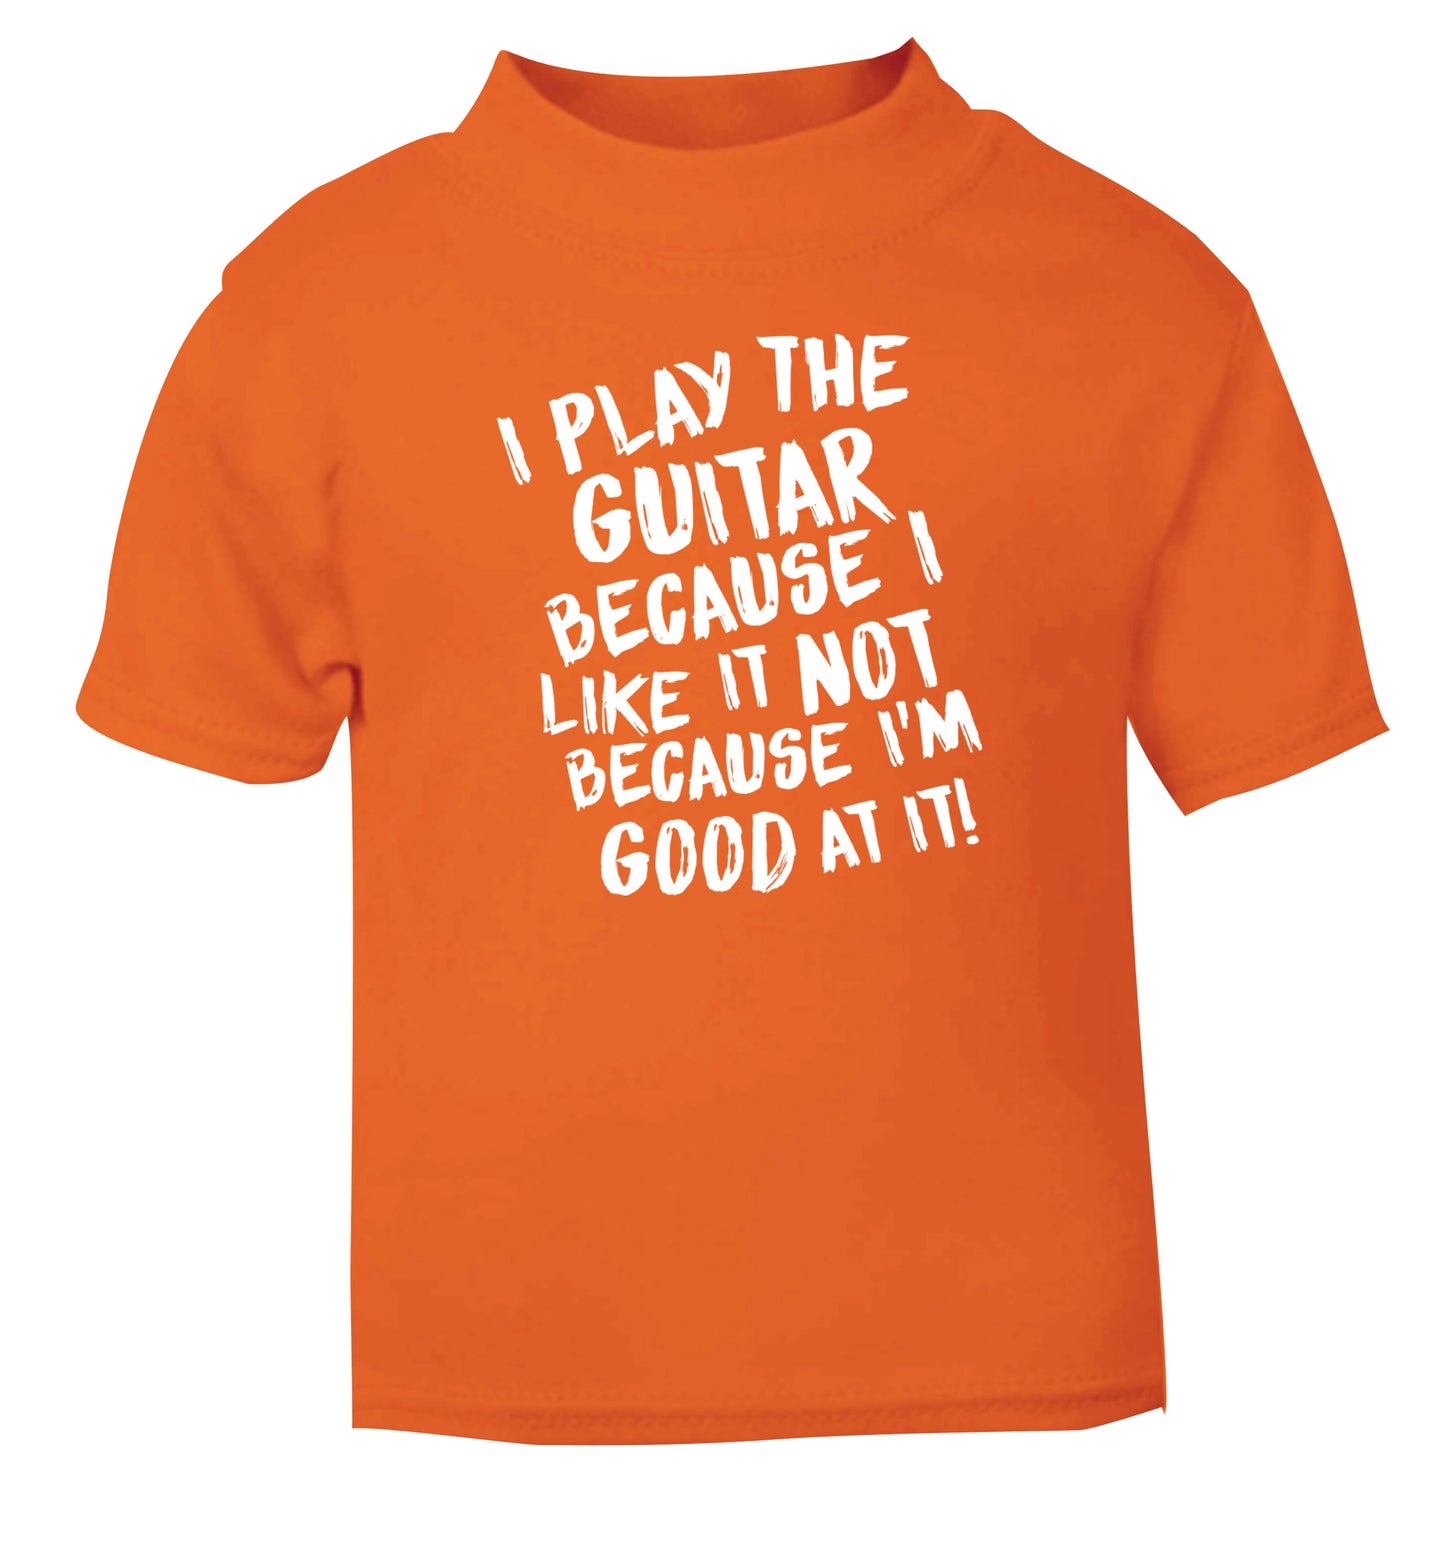 I play the guitar because I like it not because I'm good at it orange Baby Toddler Tshirt 2 Years